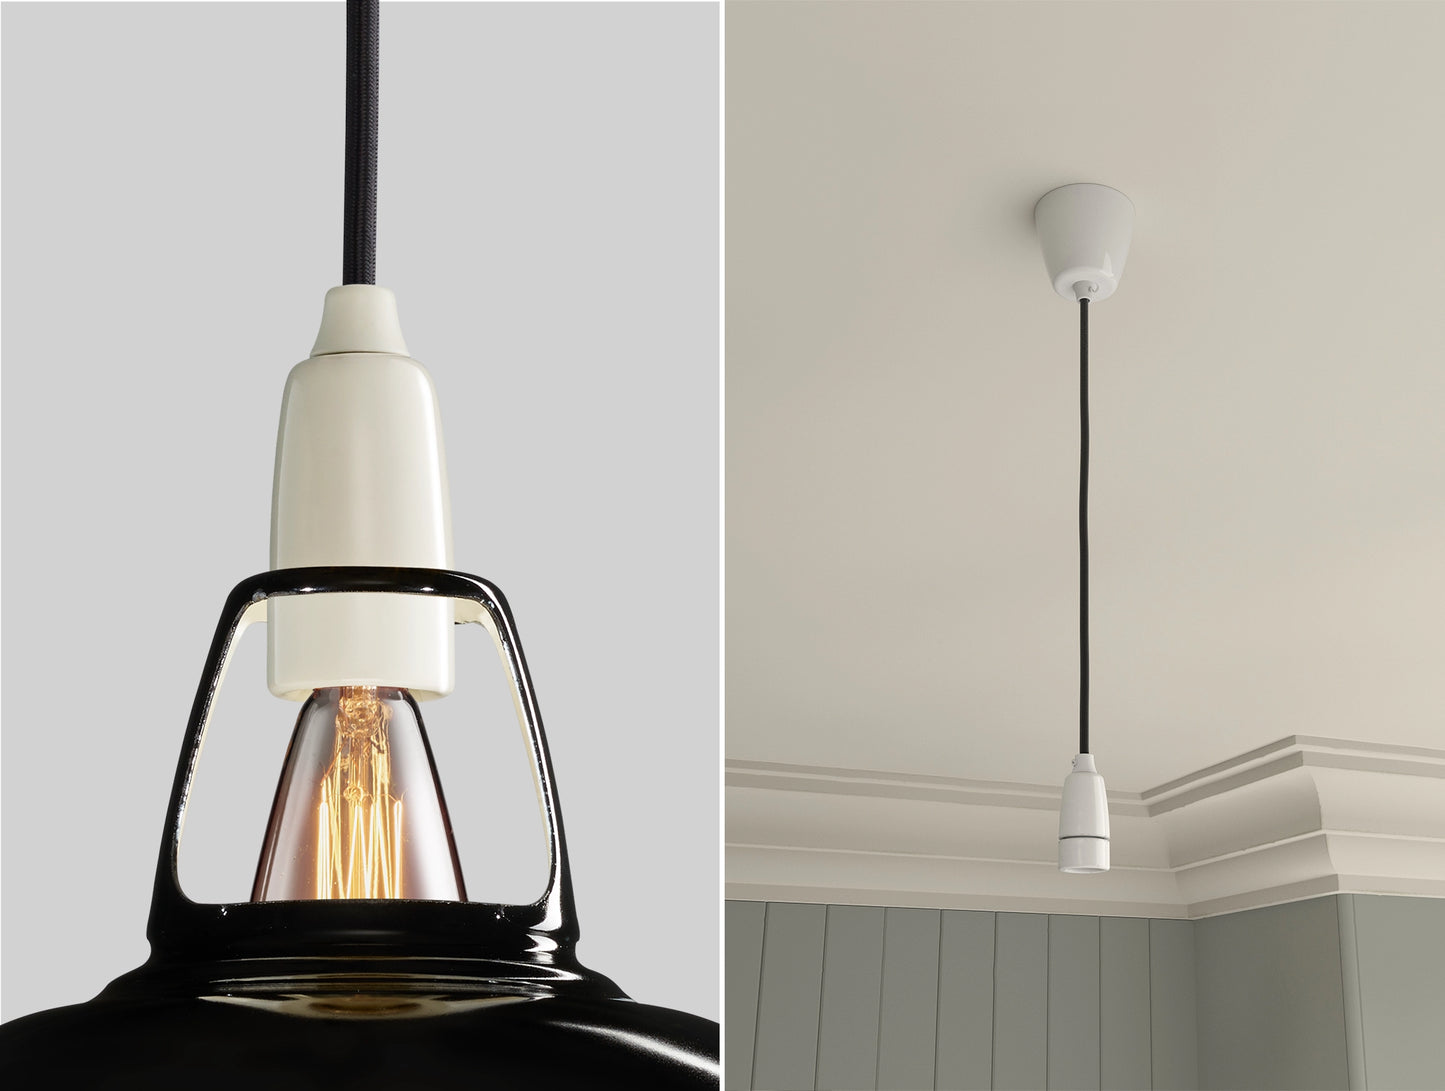 Close up of an E14 Porcelain suspension set on a Jet Black lampshade on the left. On the right, an E14 Porcelain pendant set is hanging from the ceiling